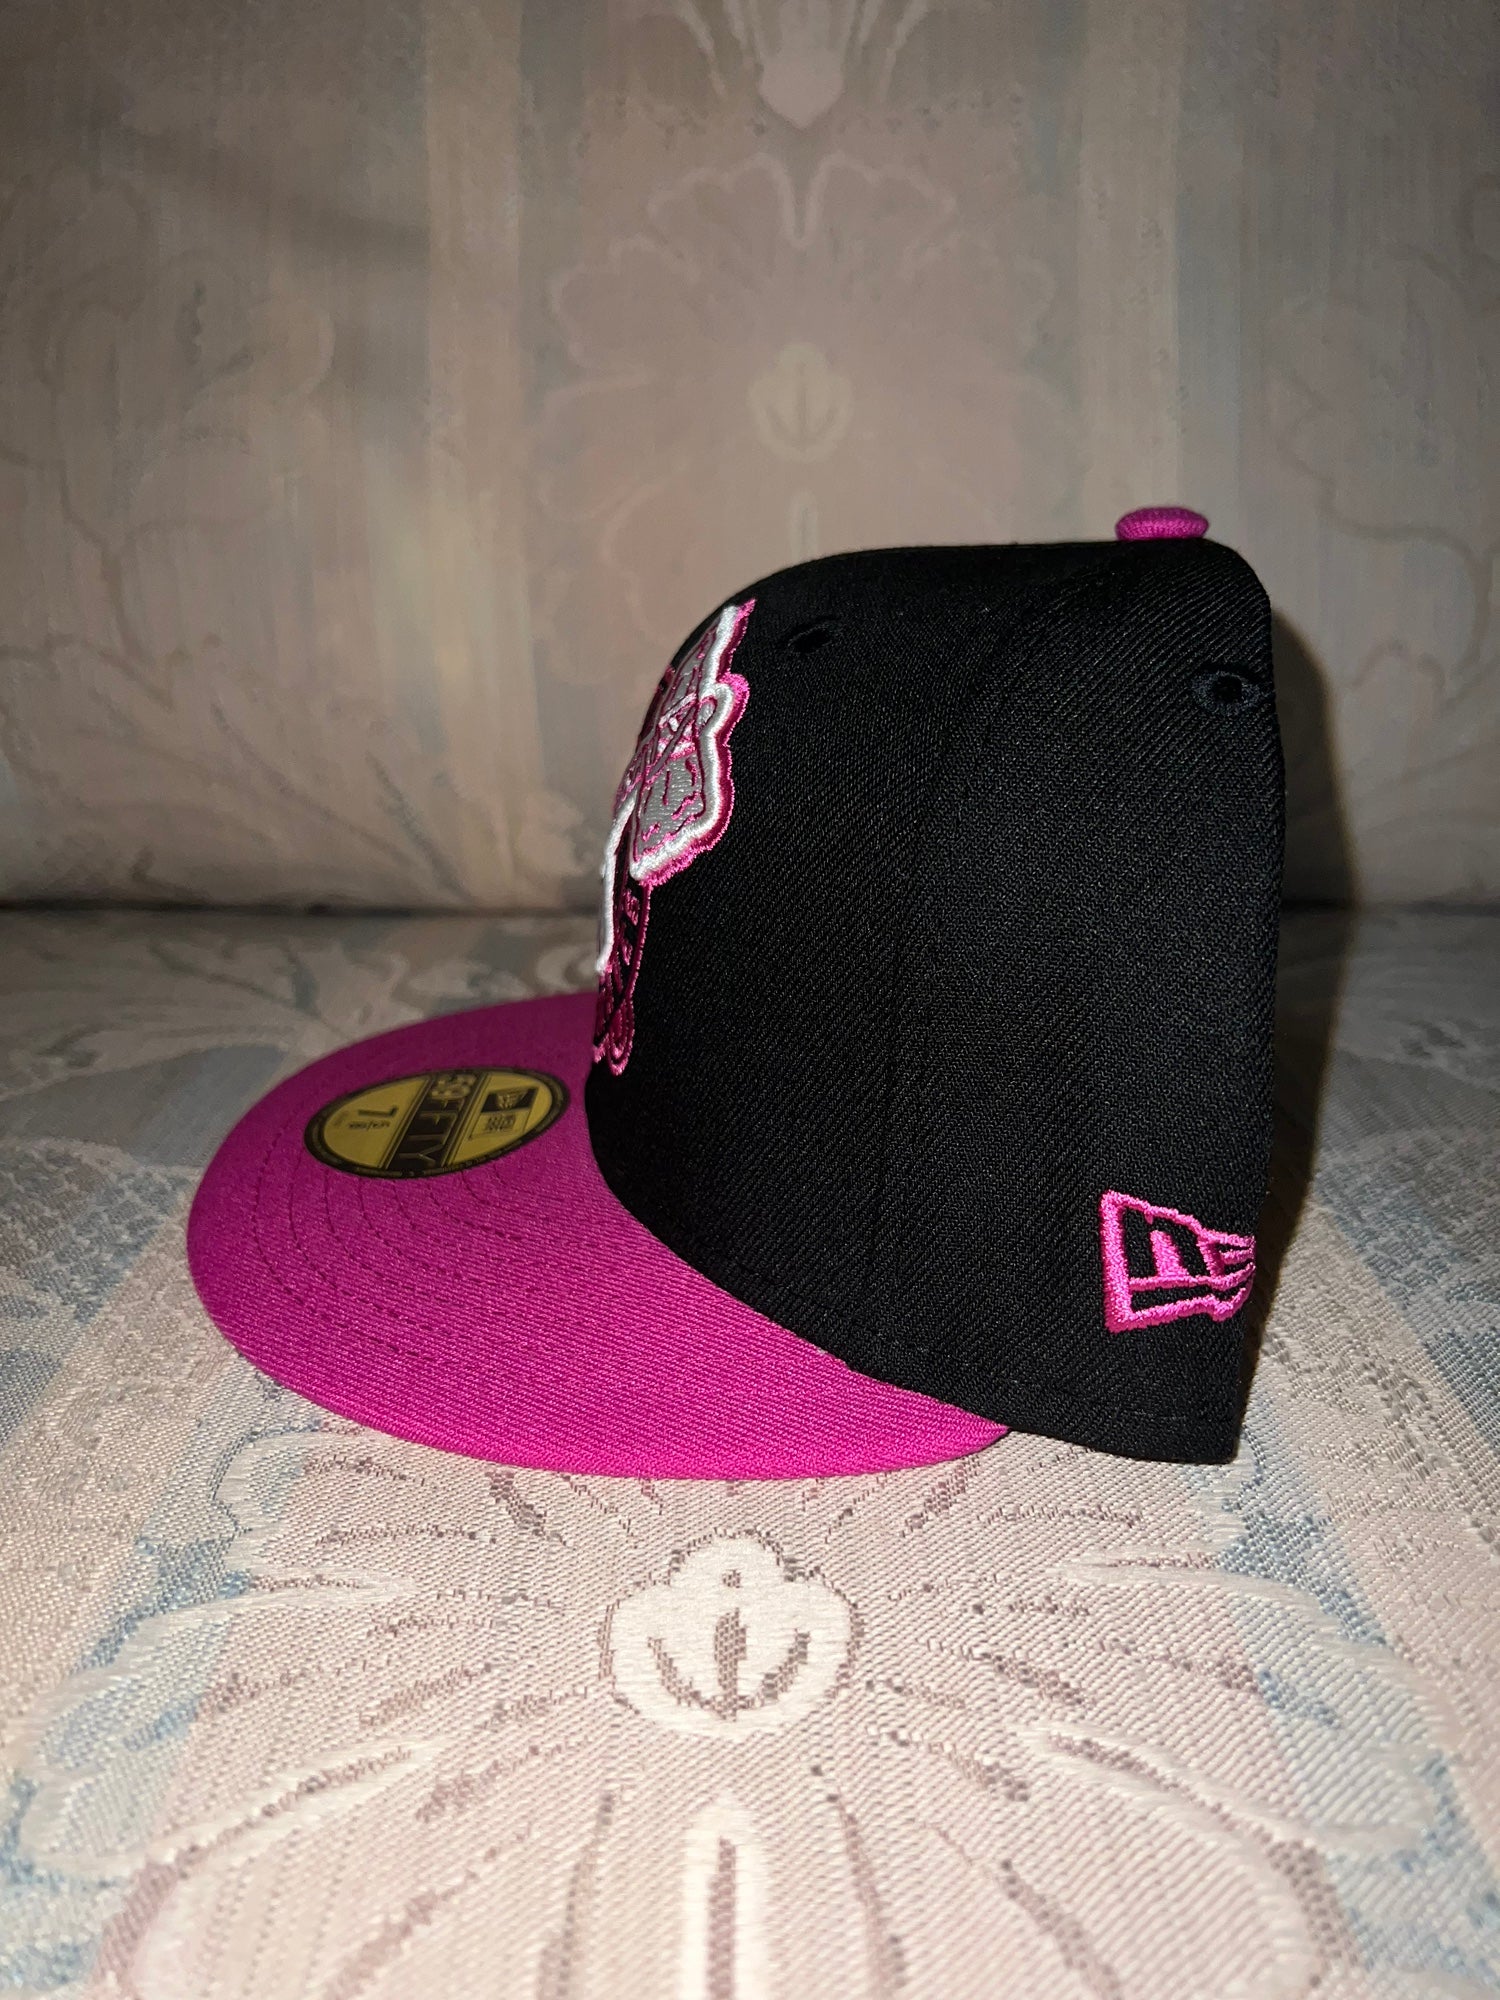 Atlanta Braves Mother's Day 59FIFTY Fitted - Stone, 7 5/8